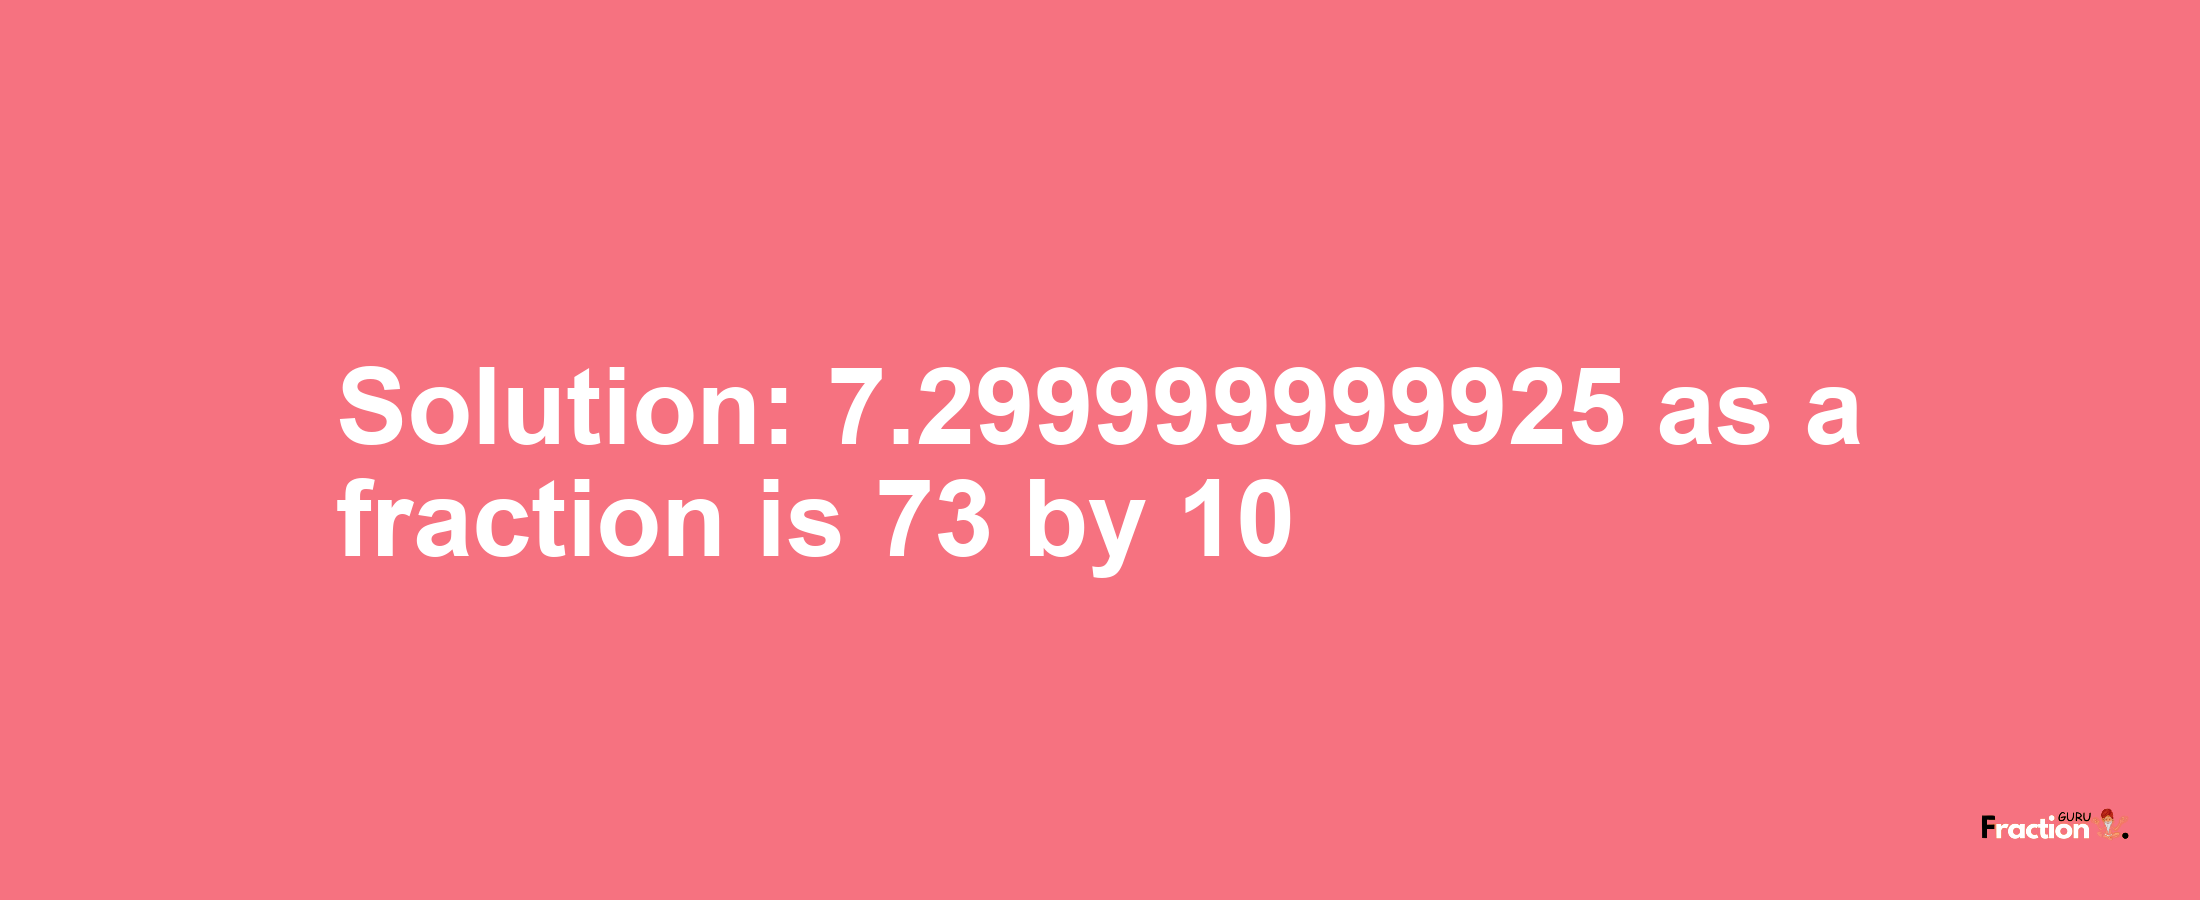 Solution:7.299999999925 as a fraction is 73/10